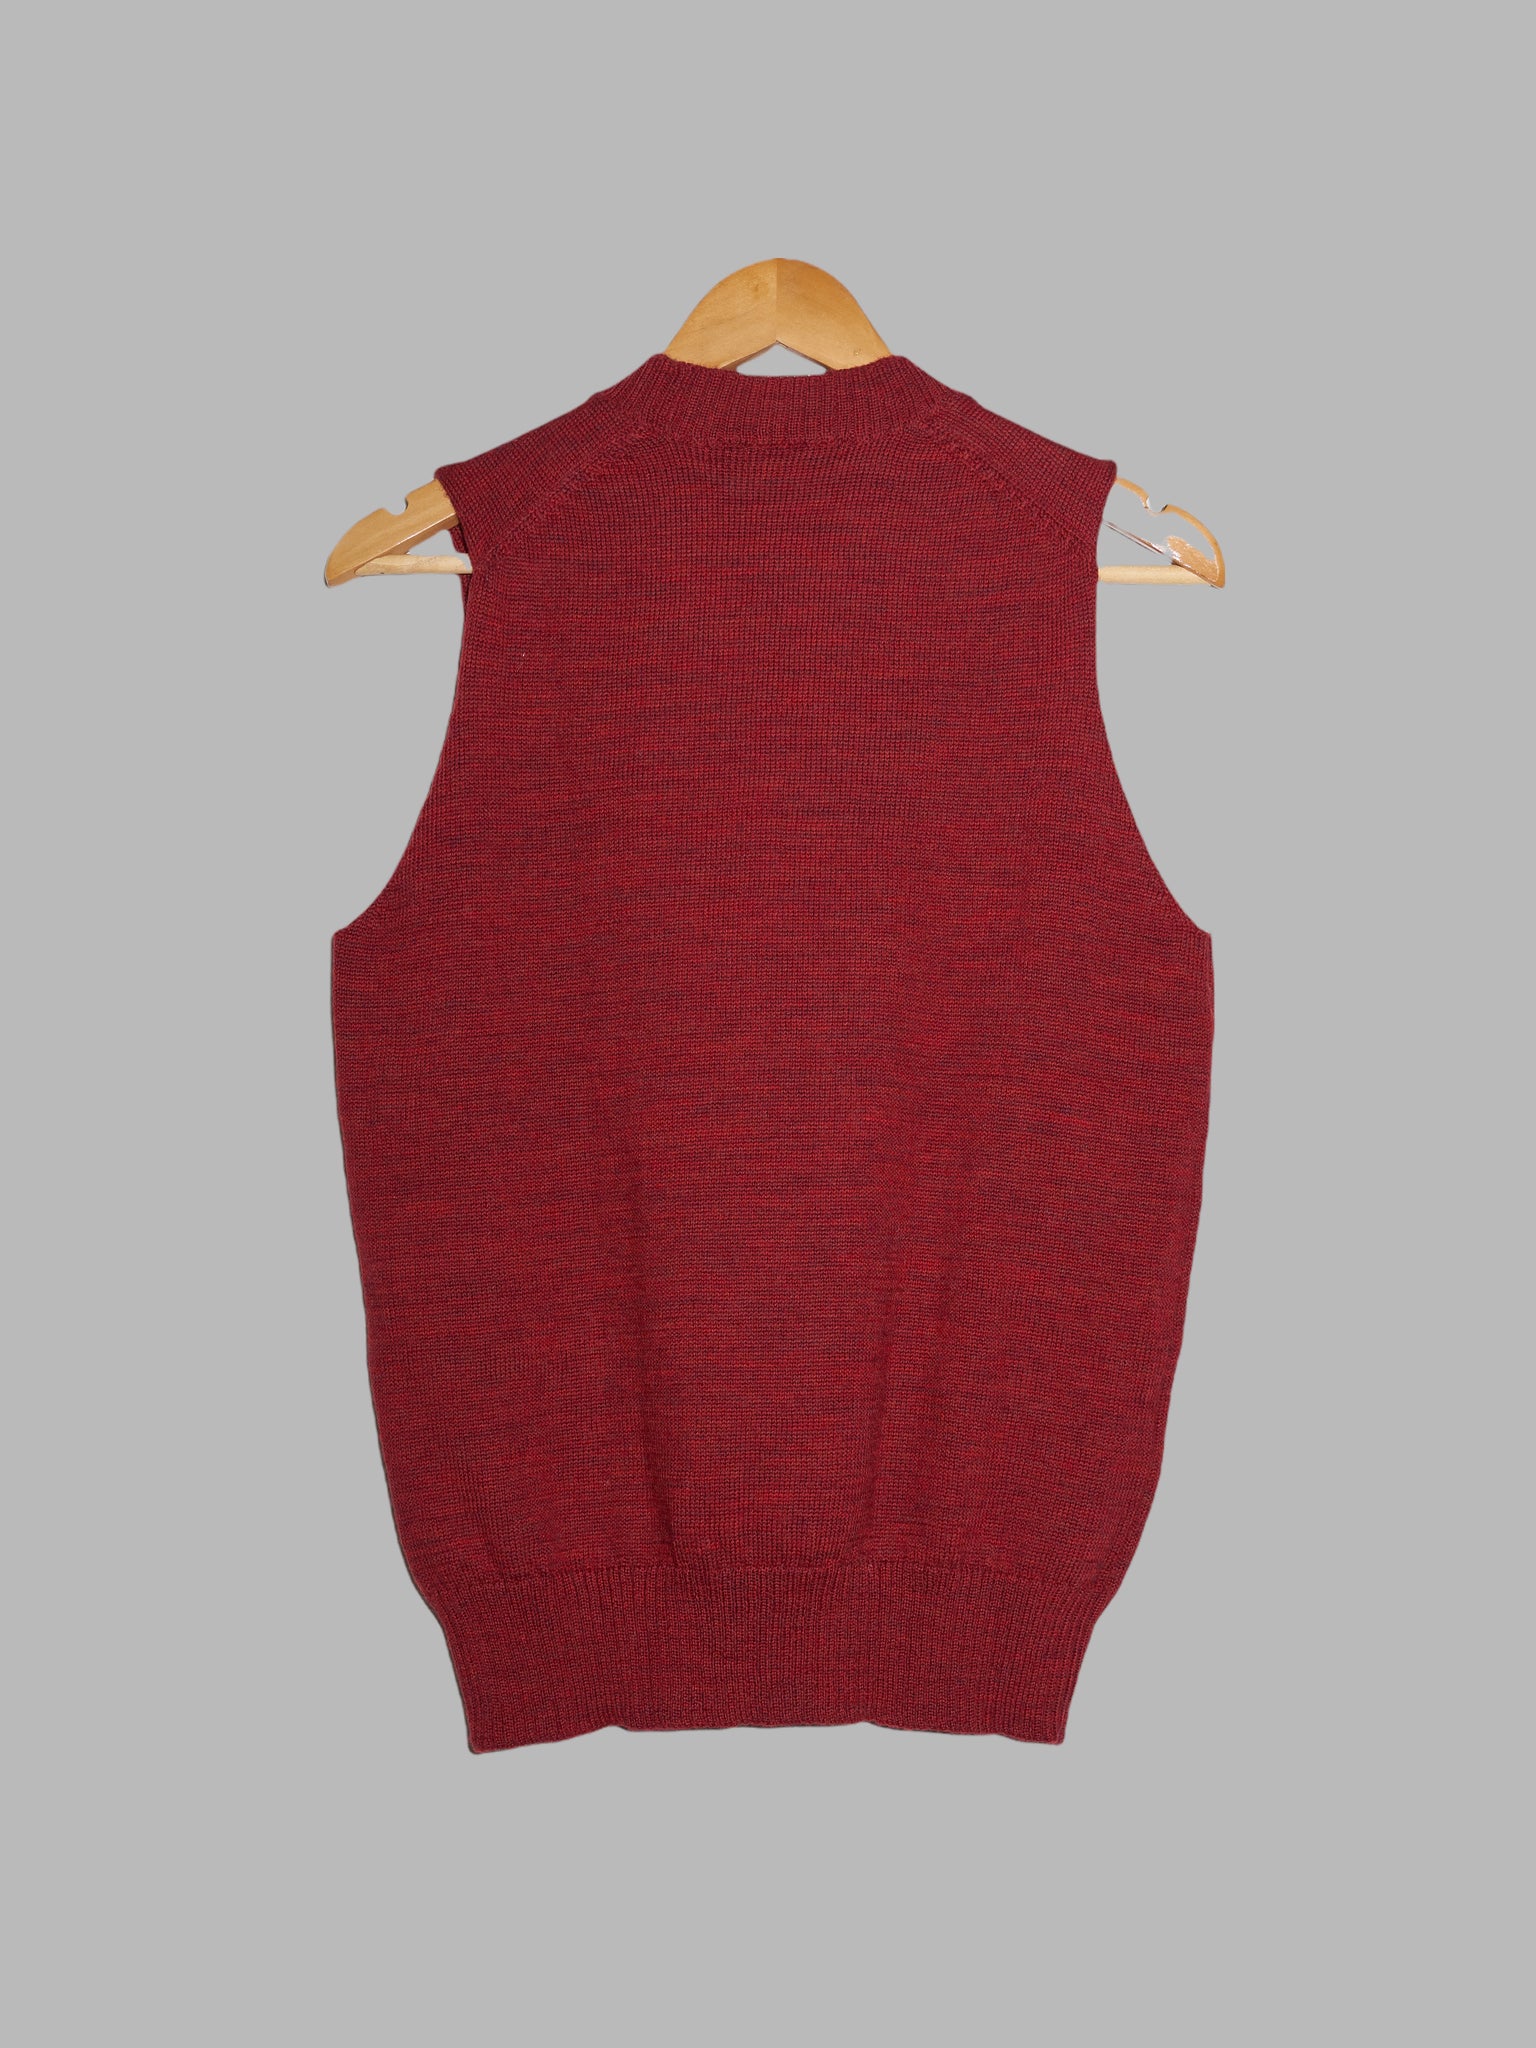 Tricot Comme des Garcons 1997 burgundy wool knit vest with floral embroidery